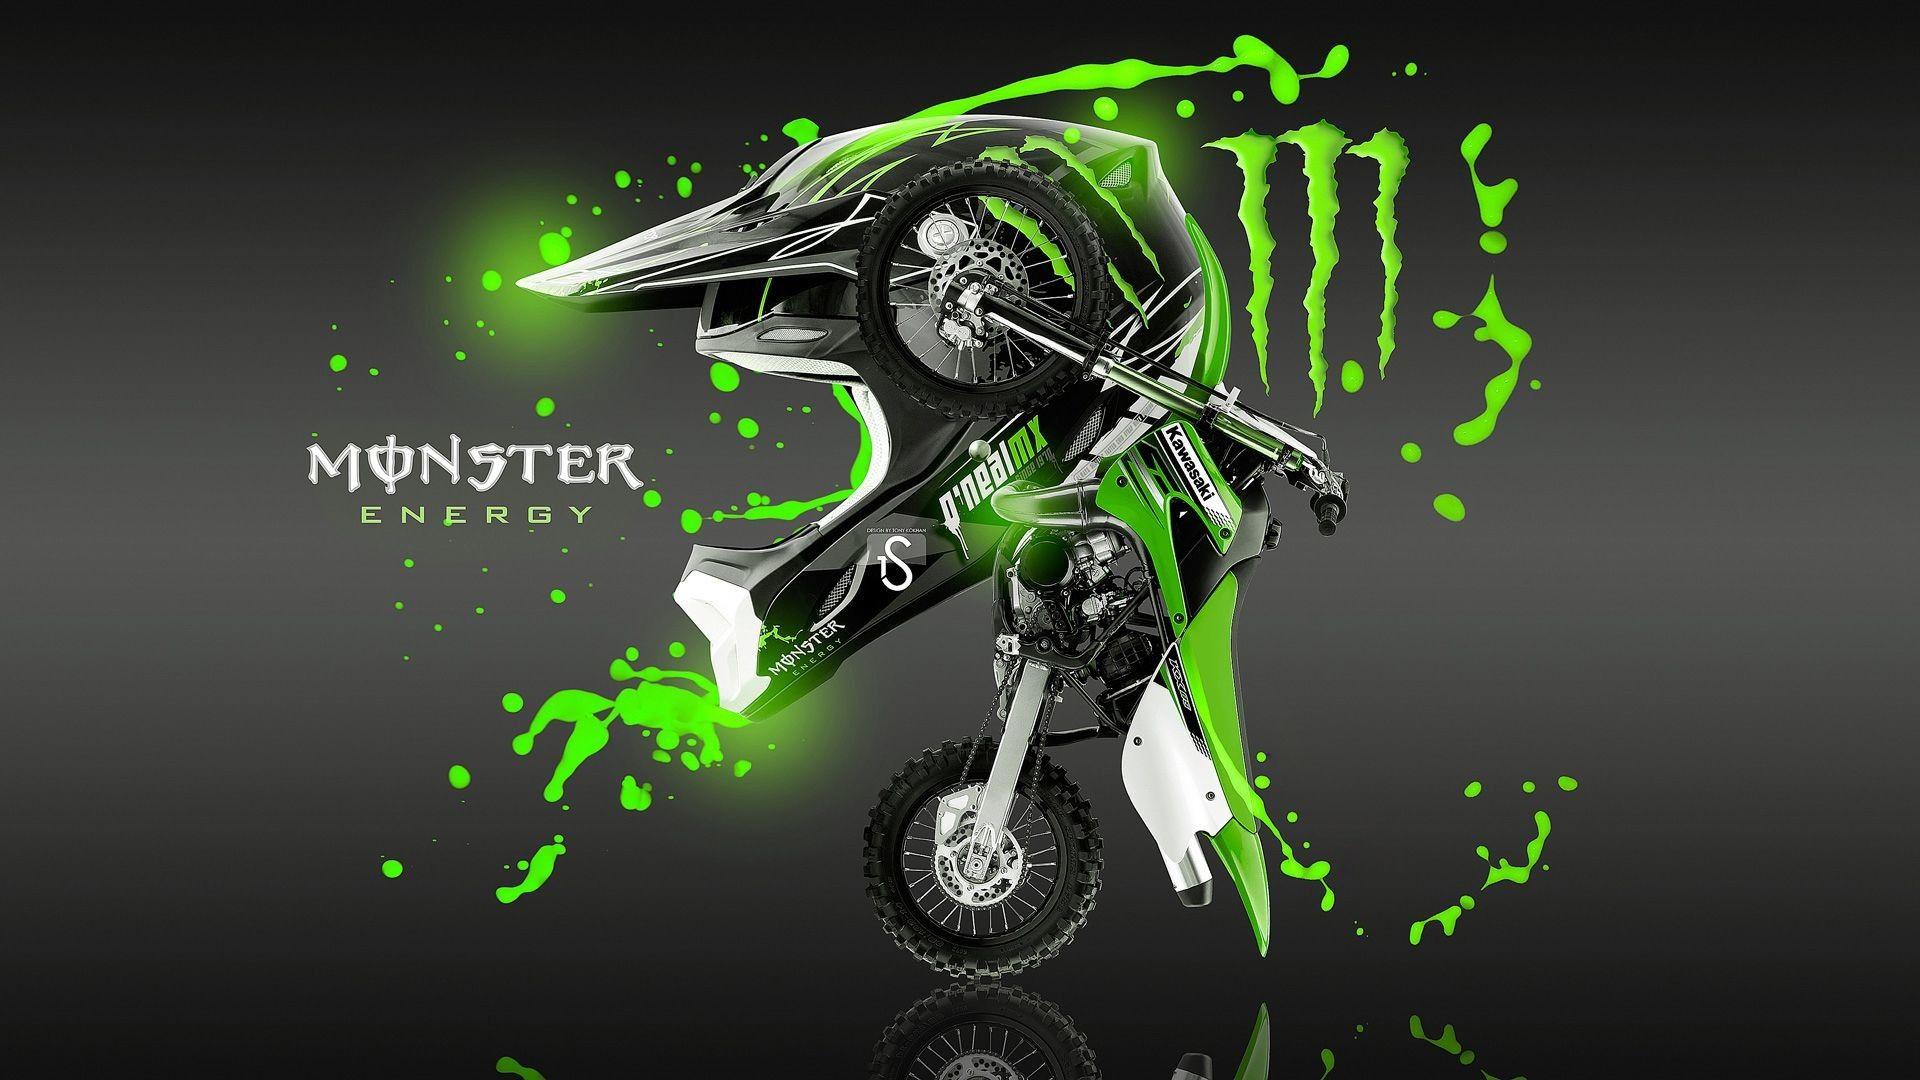 Monster Energy Wallpaper HD 2017 background picture